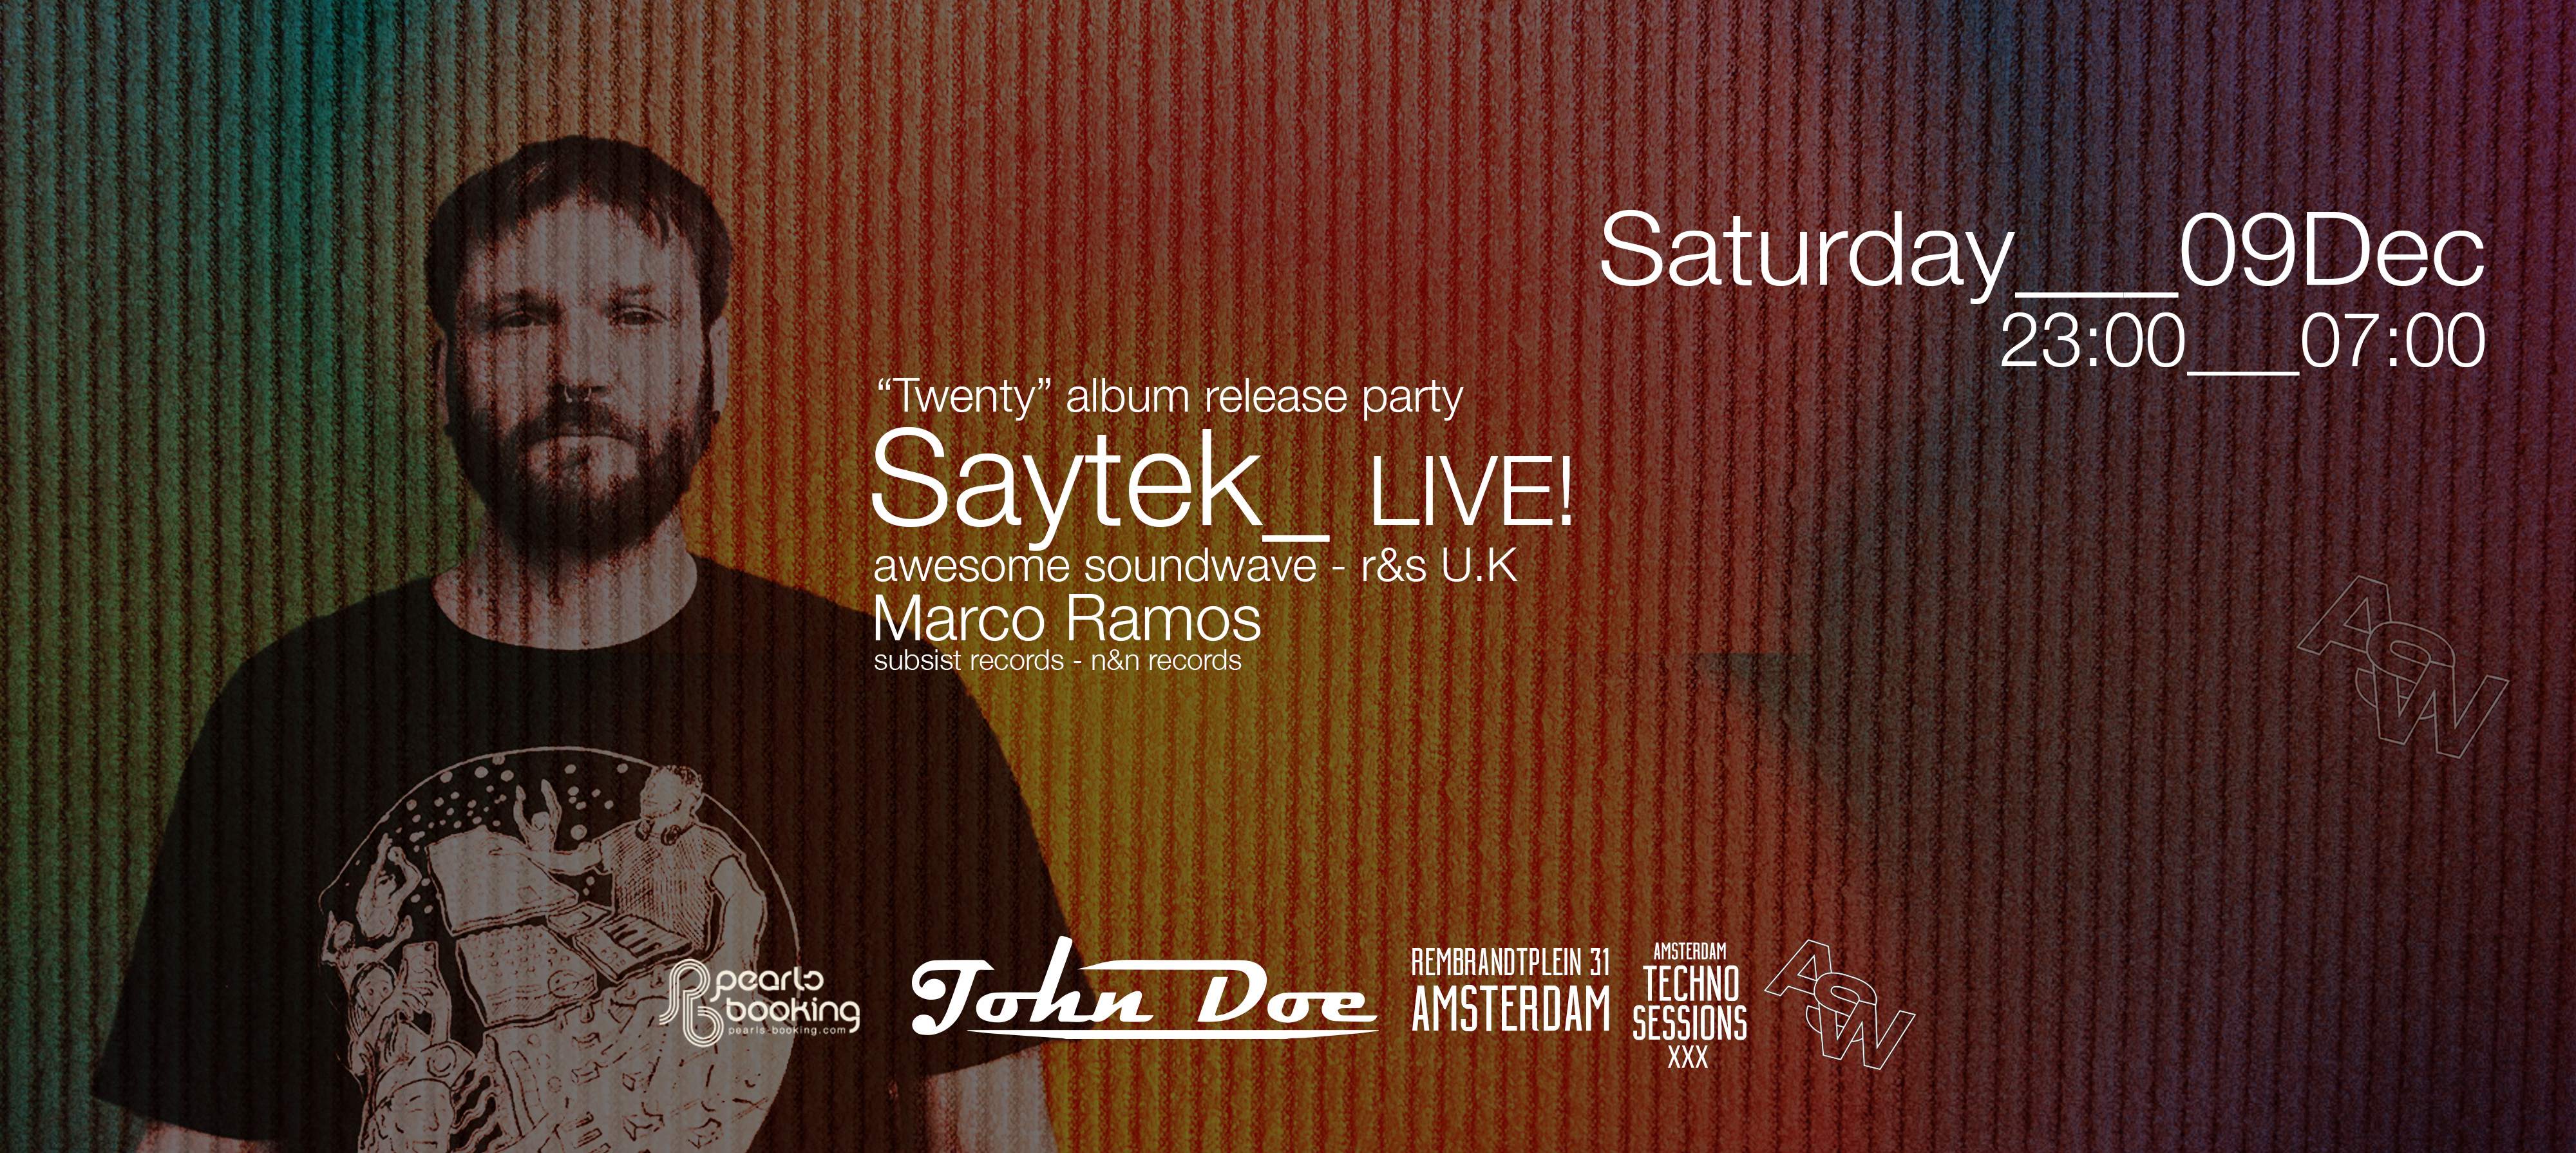 Amsterdam Techno Sessions with Saytek - LIVE! (Awesome Soundwave - R&S) U.K - フライヤー裏